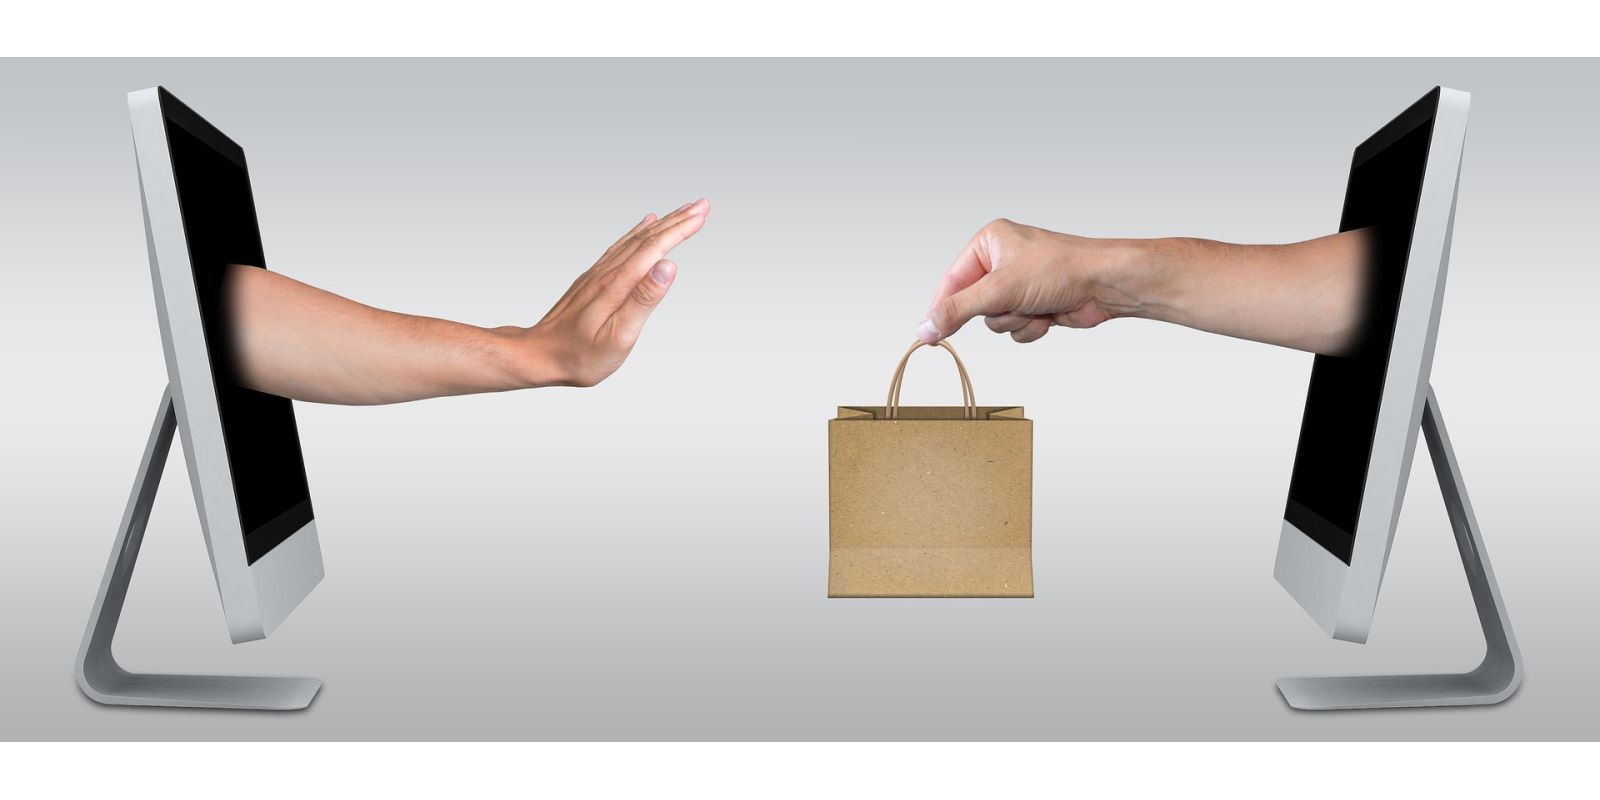 hand rejecting a shopping bag offered by another hand coming out of a computer screen